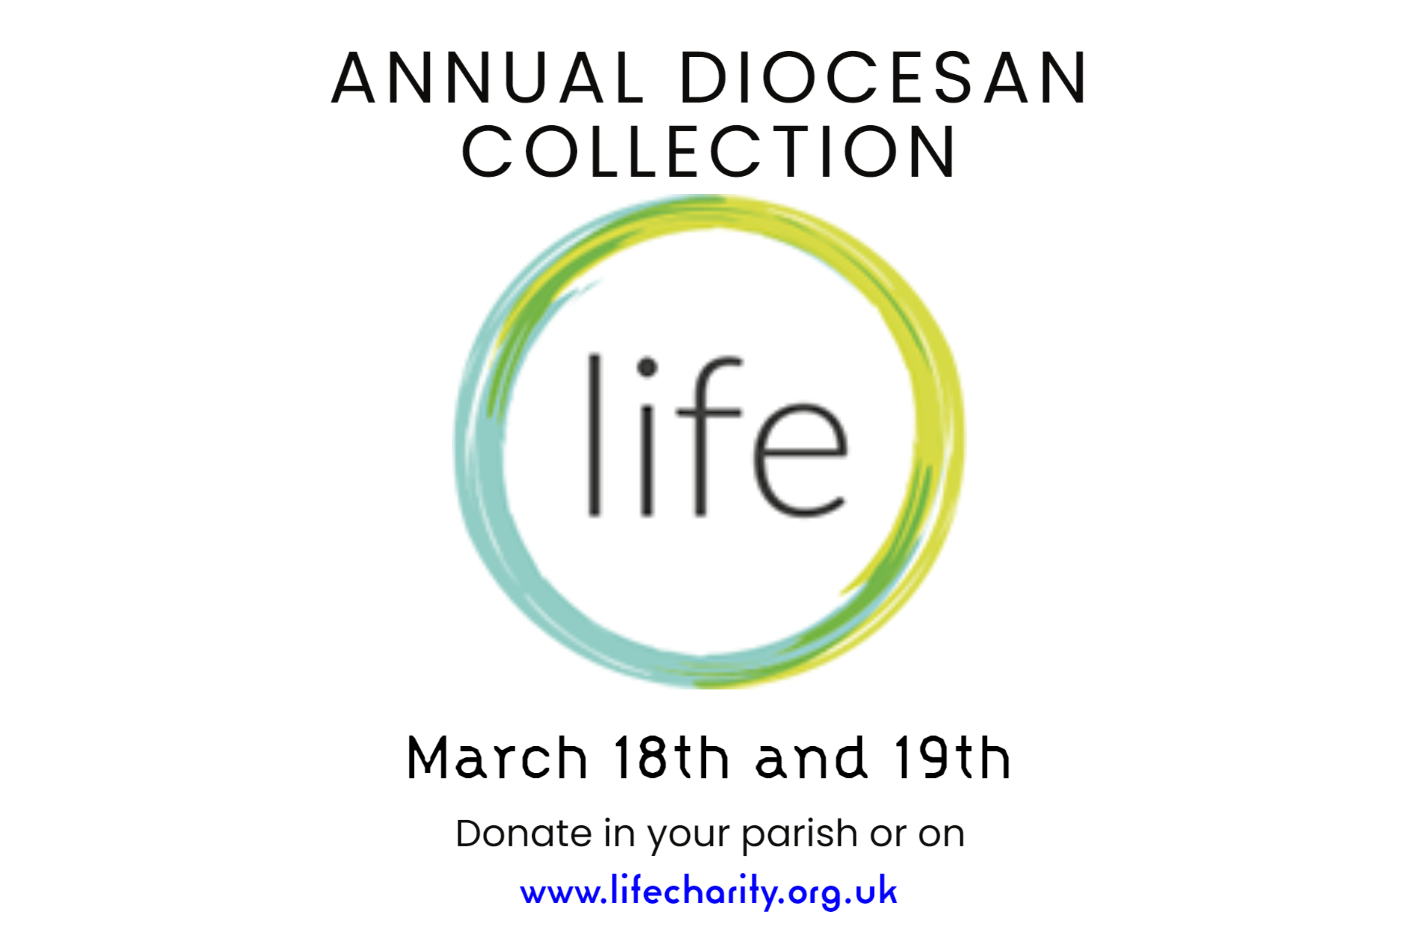 LIFE annual diocesan collection